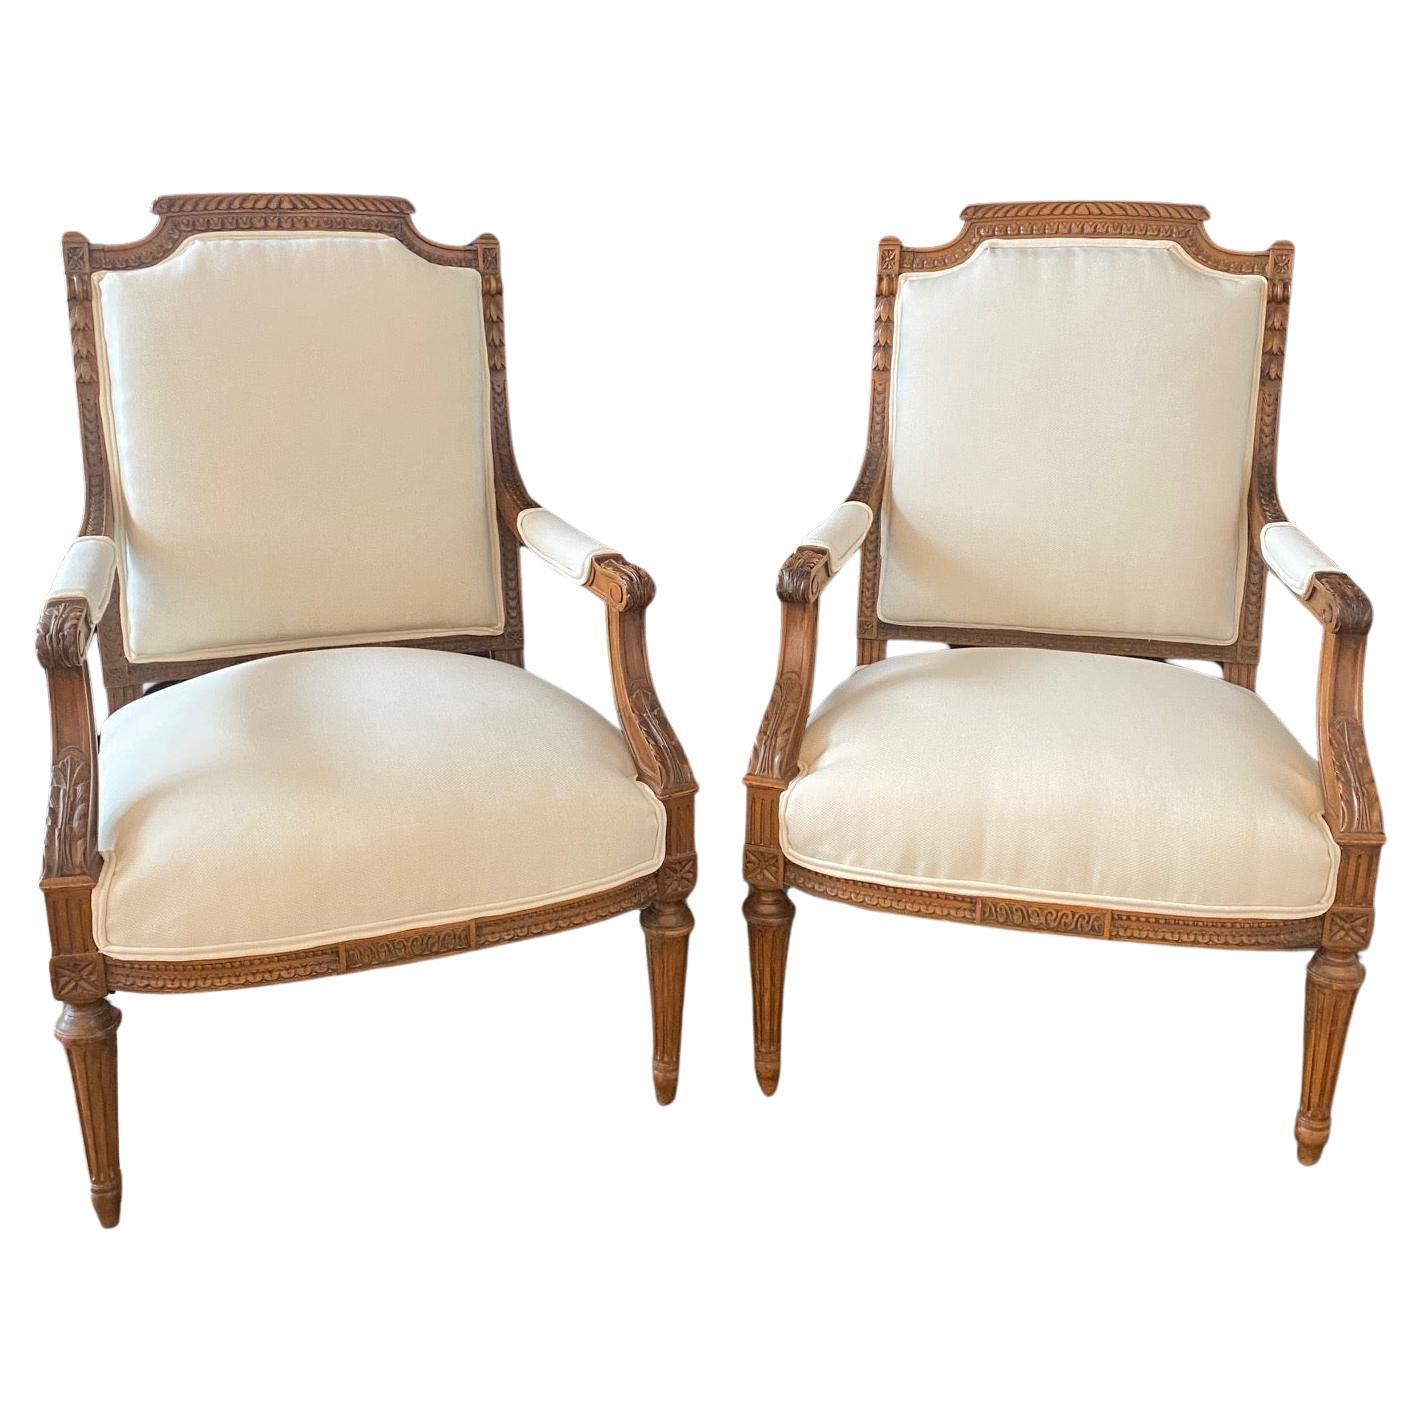 Pair of Antique French 19th Century Neoclassical Louis XVI Carved Armchairs